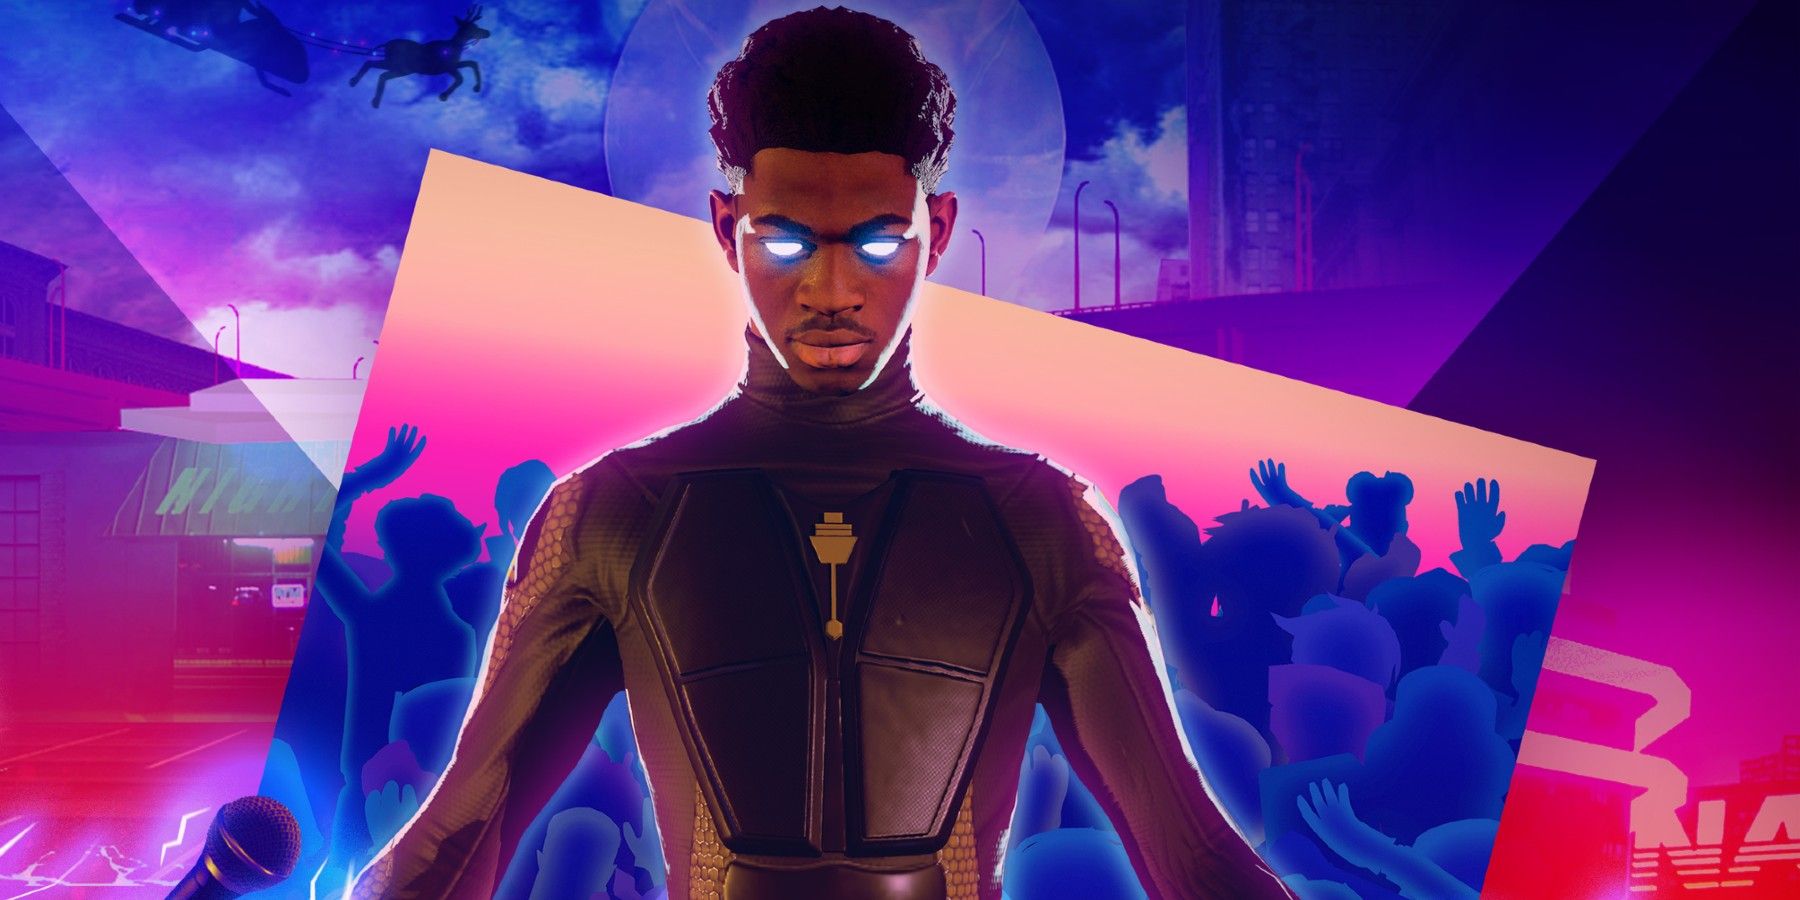 Roblox Books Lil Nas X For Fortnite Style In Game Concert Experience - that closest game to fortnite on roblox